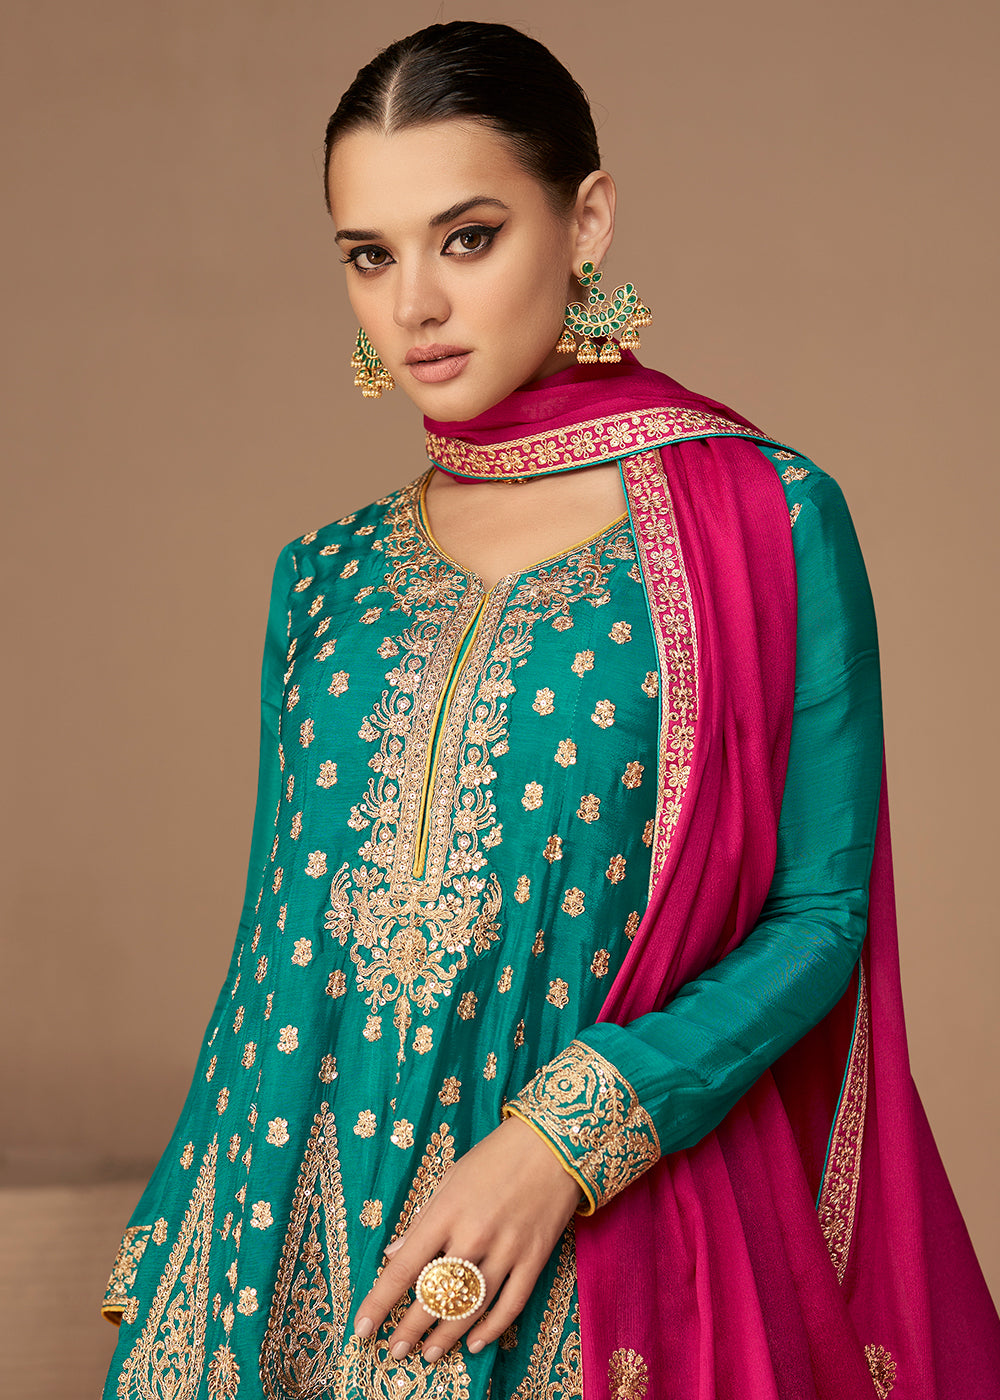 Buy Now Traditional Look Aqua Blue Chinon Silk Punjabi Style Suit Online in USA, UK, Canada, Germany, Australia & Worldwide at Empress Clothing.